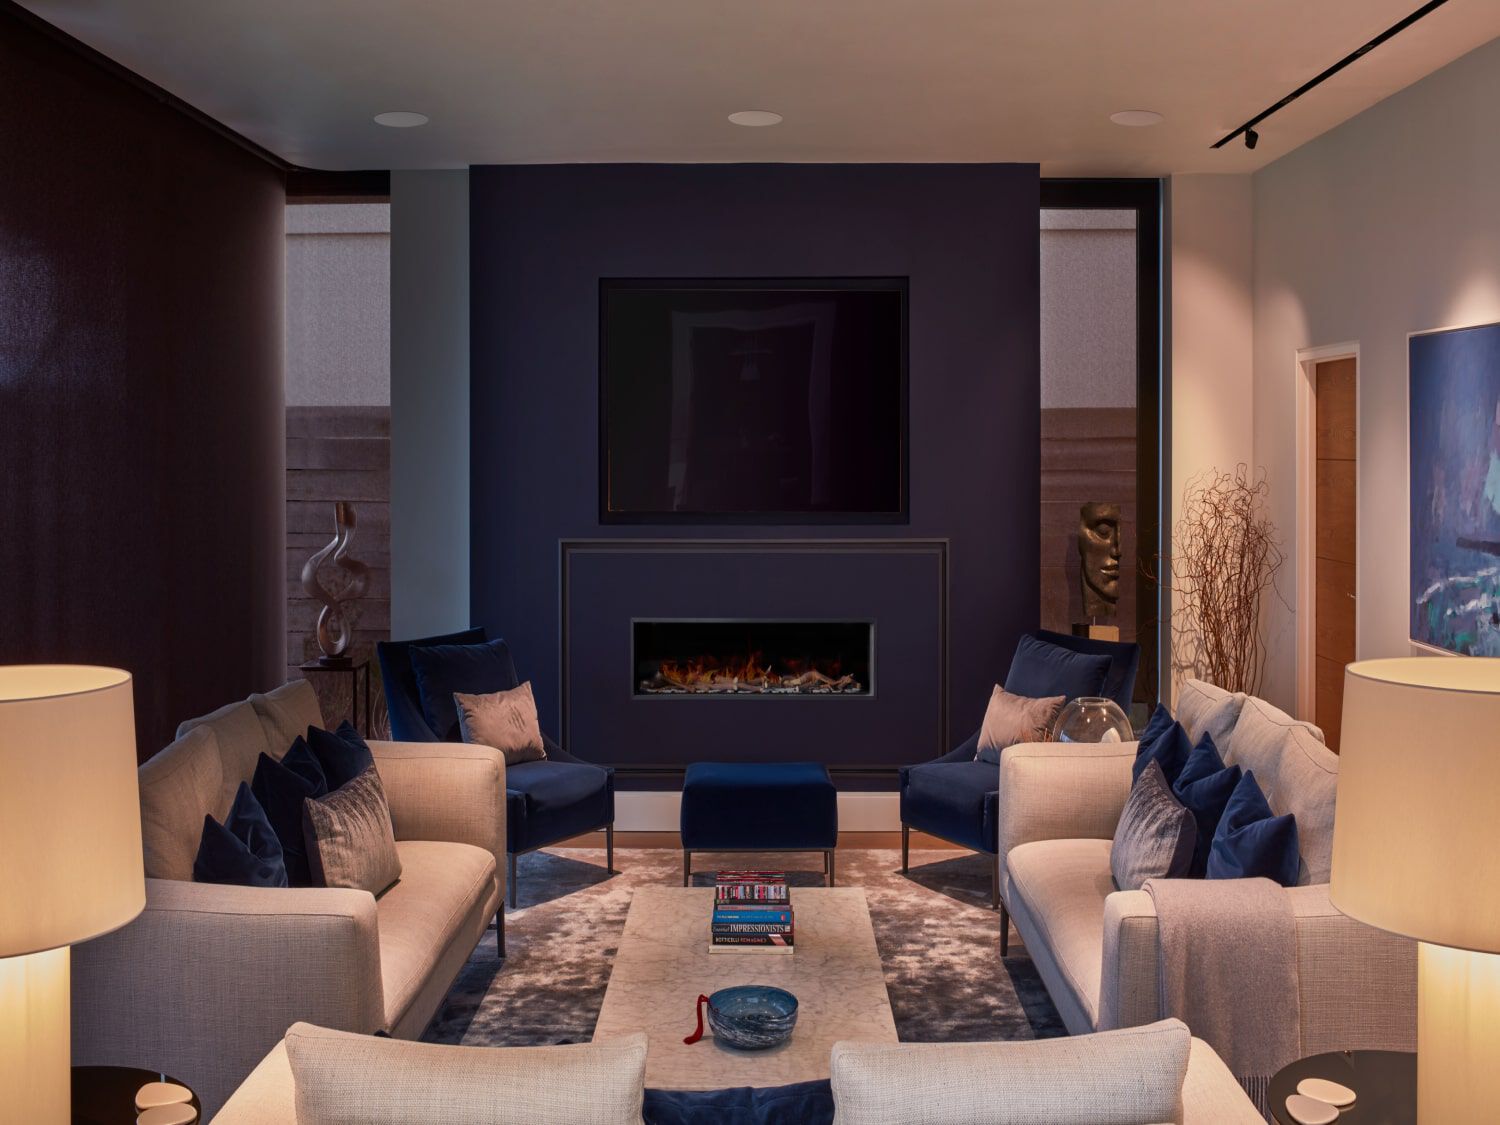 Home Audio | Bowers & Wilkins - Canada